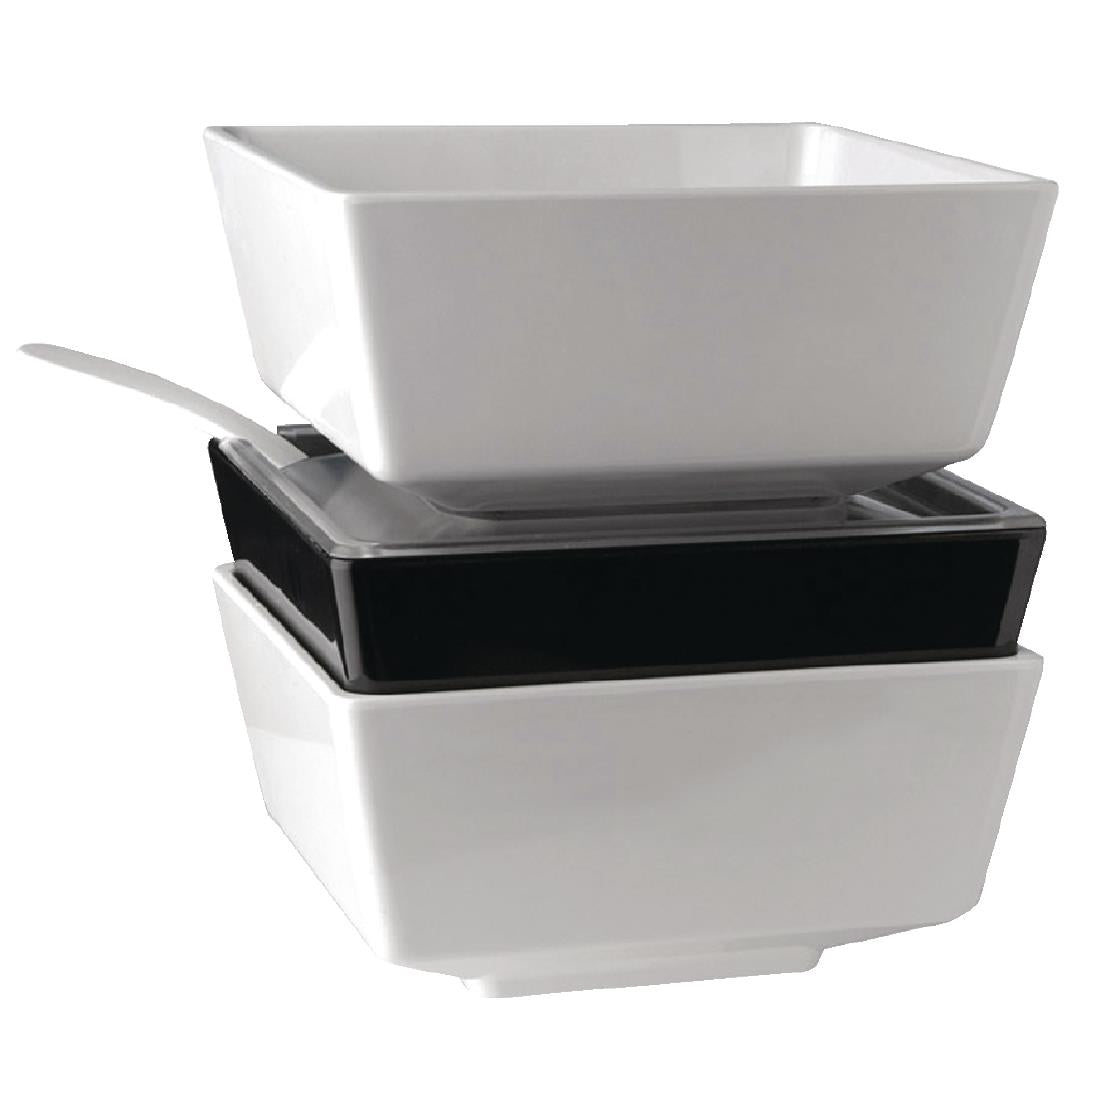 GF096 APS Float White Square Bowl 7in JD Catering Equipment Solutions Ltd